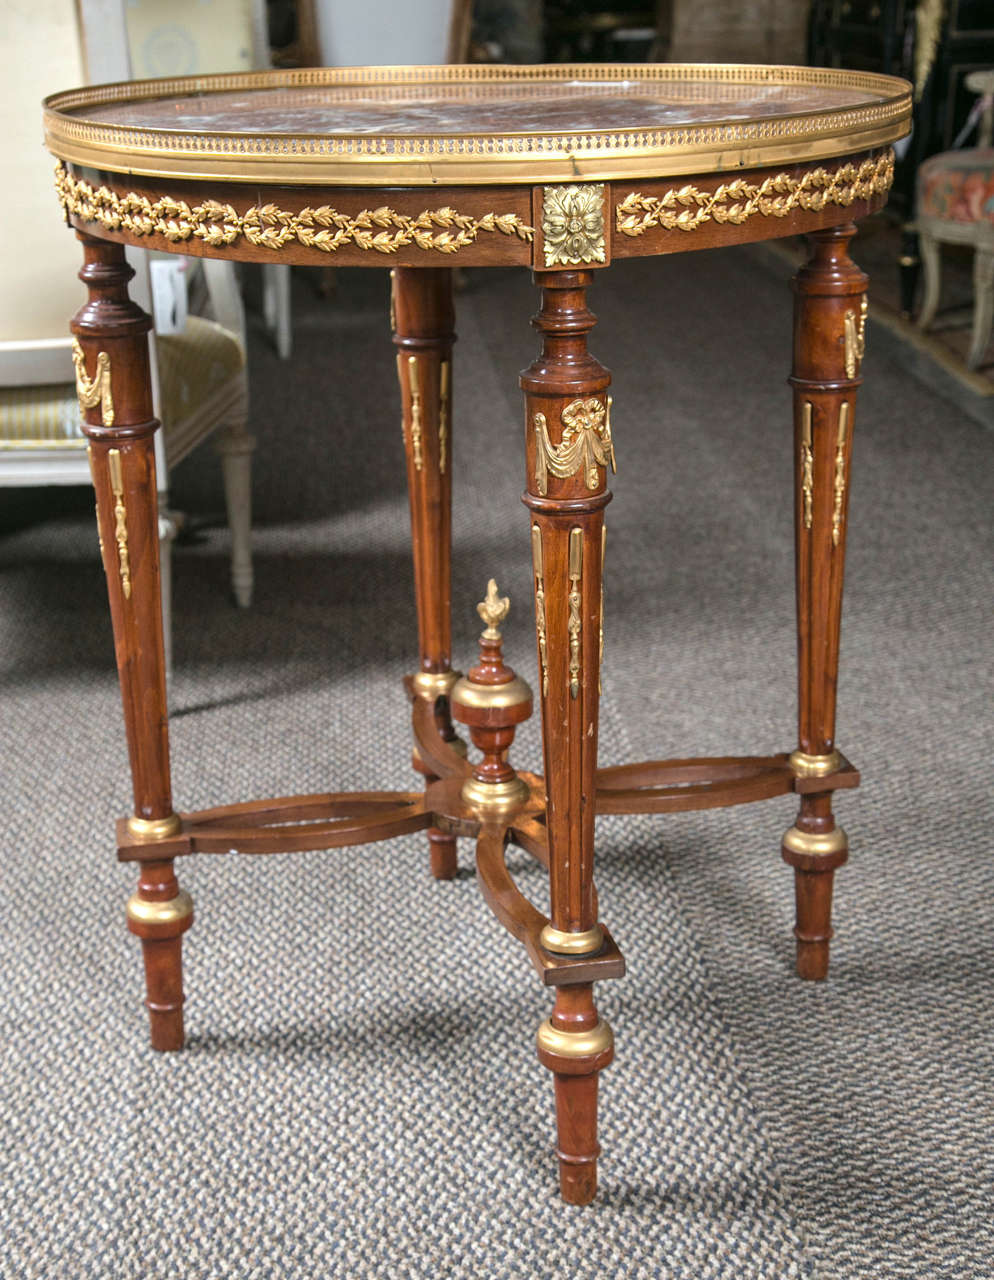 A beautiful French Louis XVI style mahogany end table or bouillotte table, circa 1920s, the circular rouse marble-top with a pierced bronze gallery frame, supported on a narrow frieze decorated with bronze mounts, raised on fluted legs joint by an